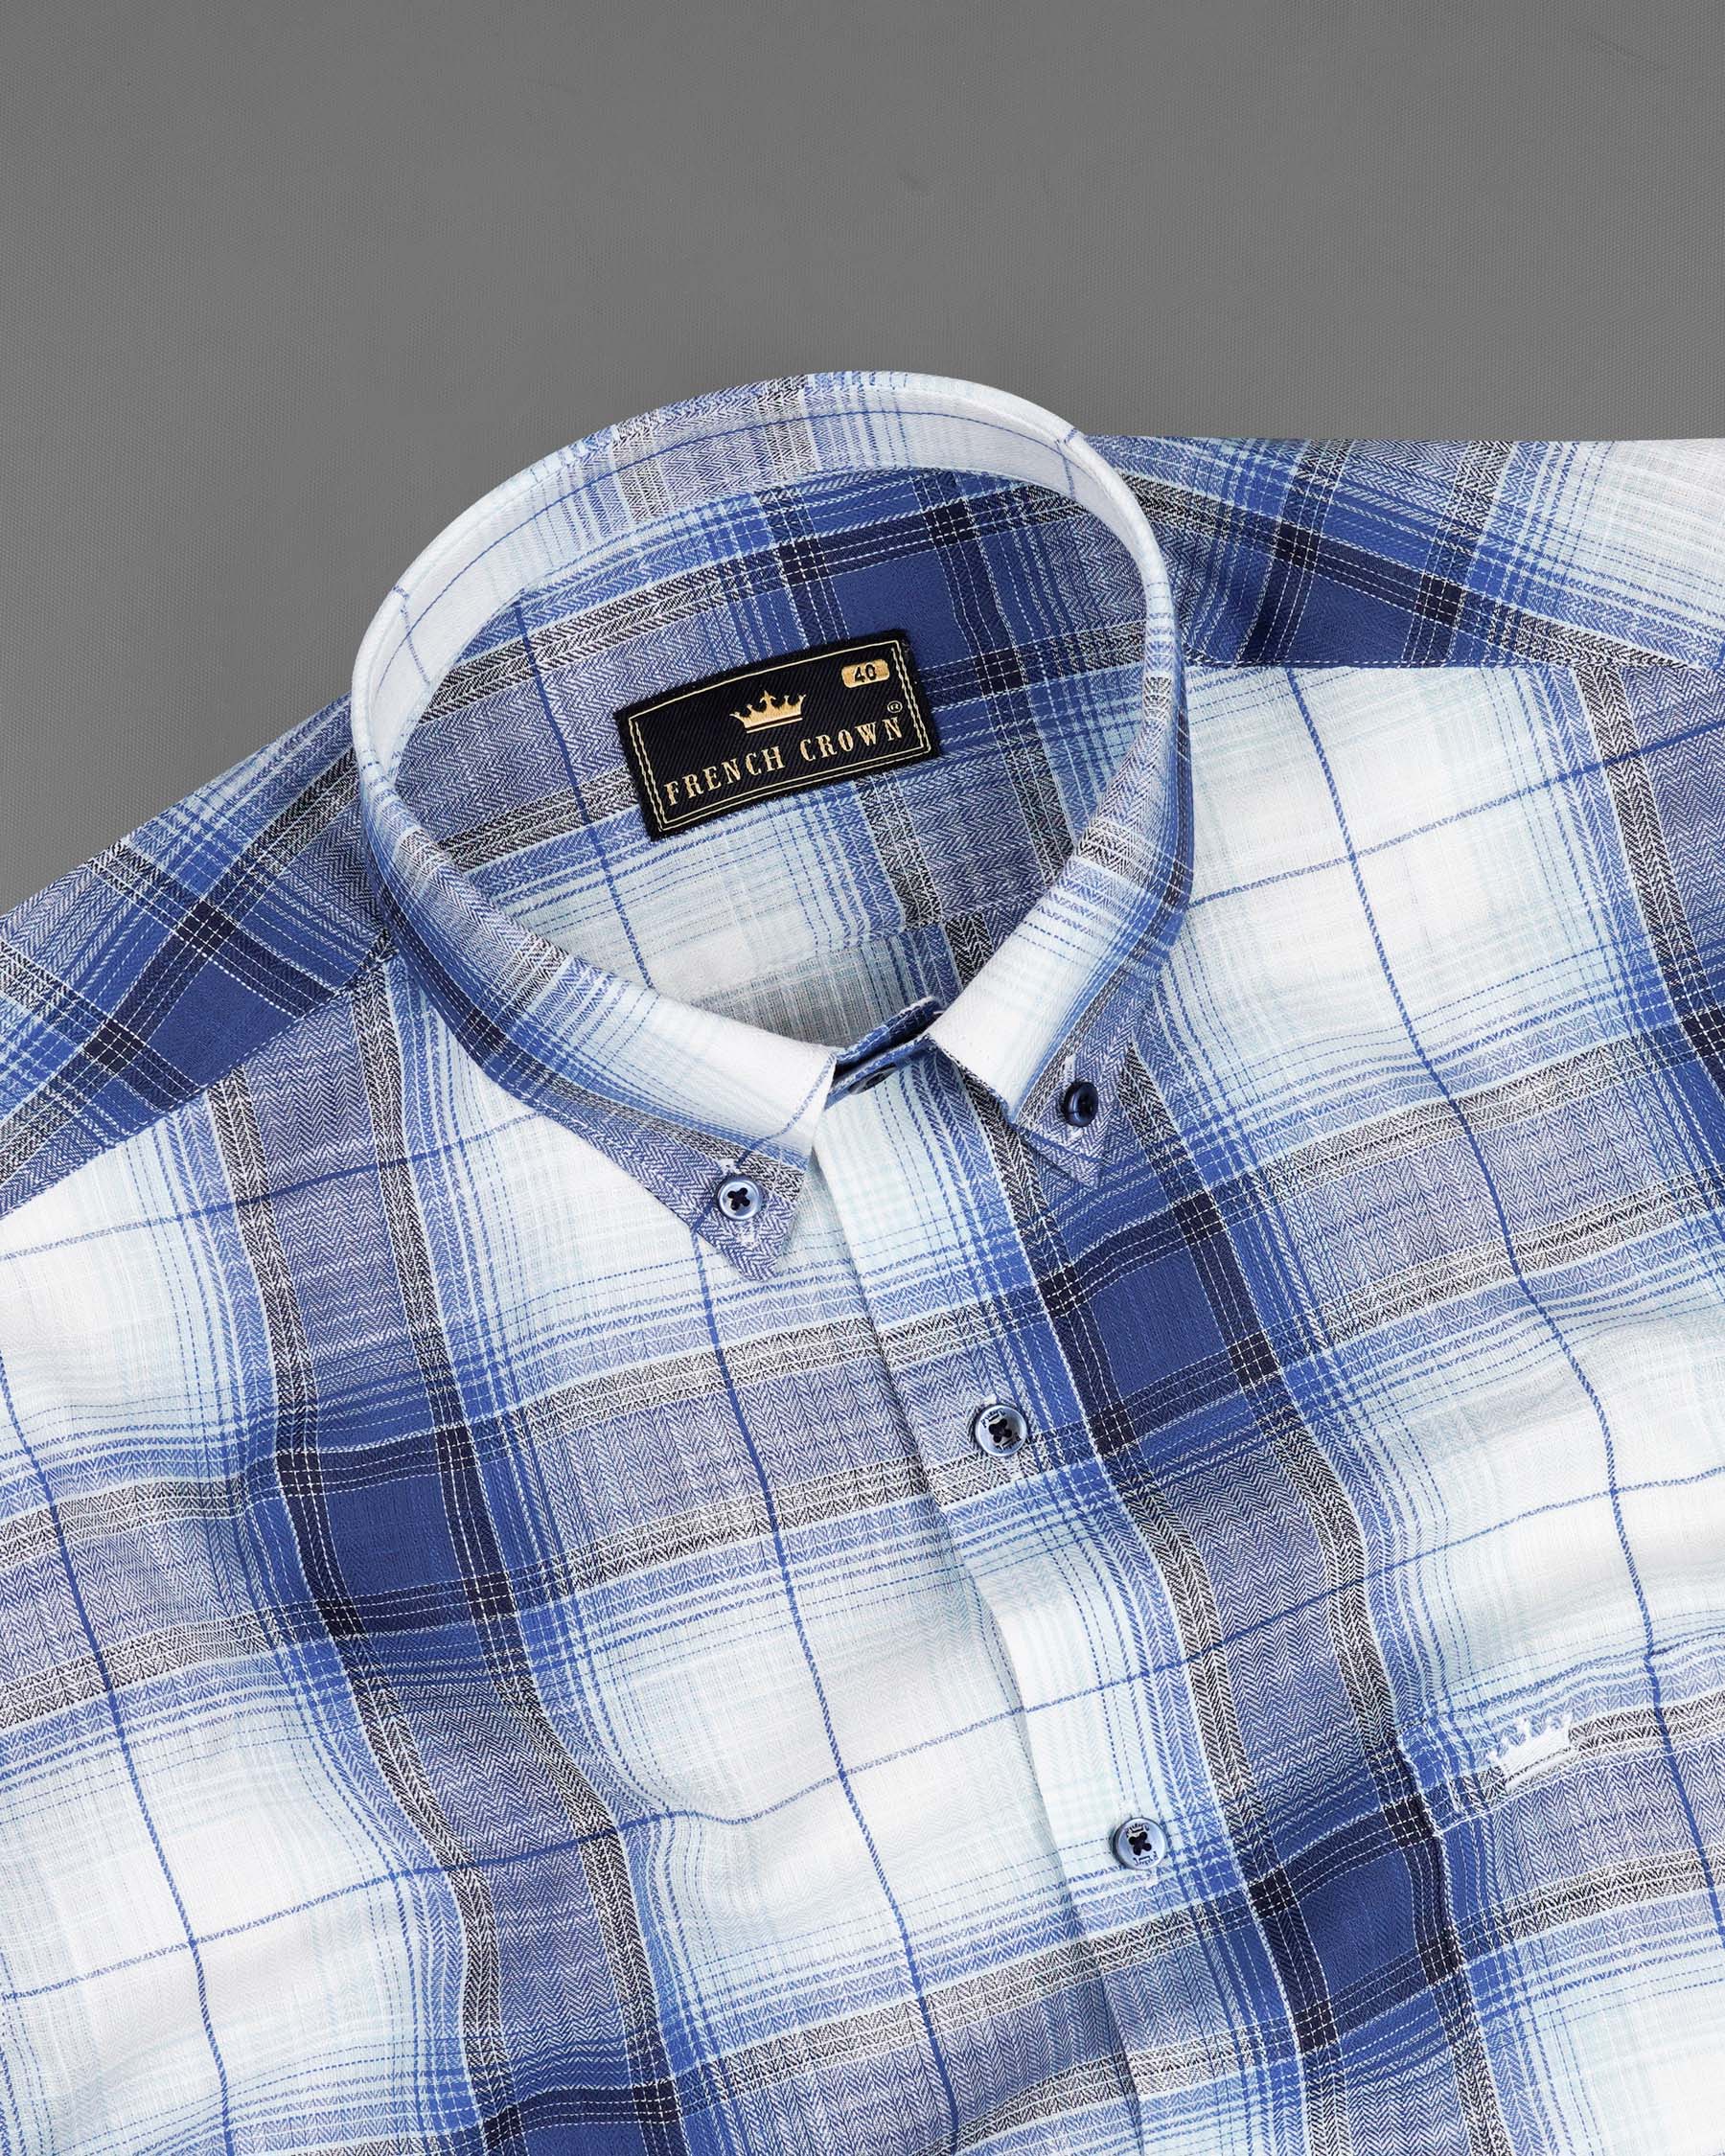 Bright White and Twilight Blue Plaid Herringbone Shirt 7624-BD-BLE-38, 7624-BD-BLE-H-38, 7624-BD-BLE-39,7624-BD-BLE-H-39, 7624-BD-BLE-40, 7624-BD-BLE-H-40, 7624-BD-BLE-42, 7624-BD-BLE-H-42, 7624-BD-BLE-44, 7624-BD-BLE-H-44, 7624-BD-BLE-46, 7624-BD-BLE-H-46, 7624-BD-BLE-48, 7624-BD-BLE-H-48, 7624-BD-BLE-50, 7624-BD-BLE-H-50, 7624-BD-BLE-52, 7624-BD-BLE-H-52